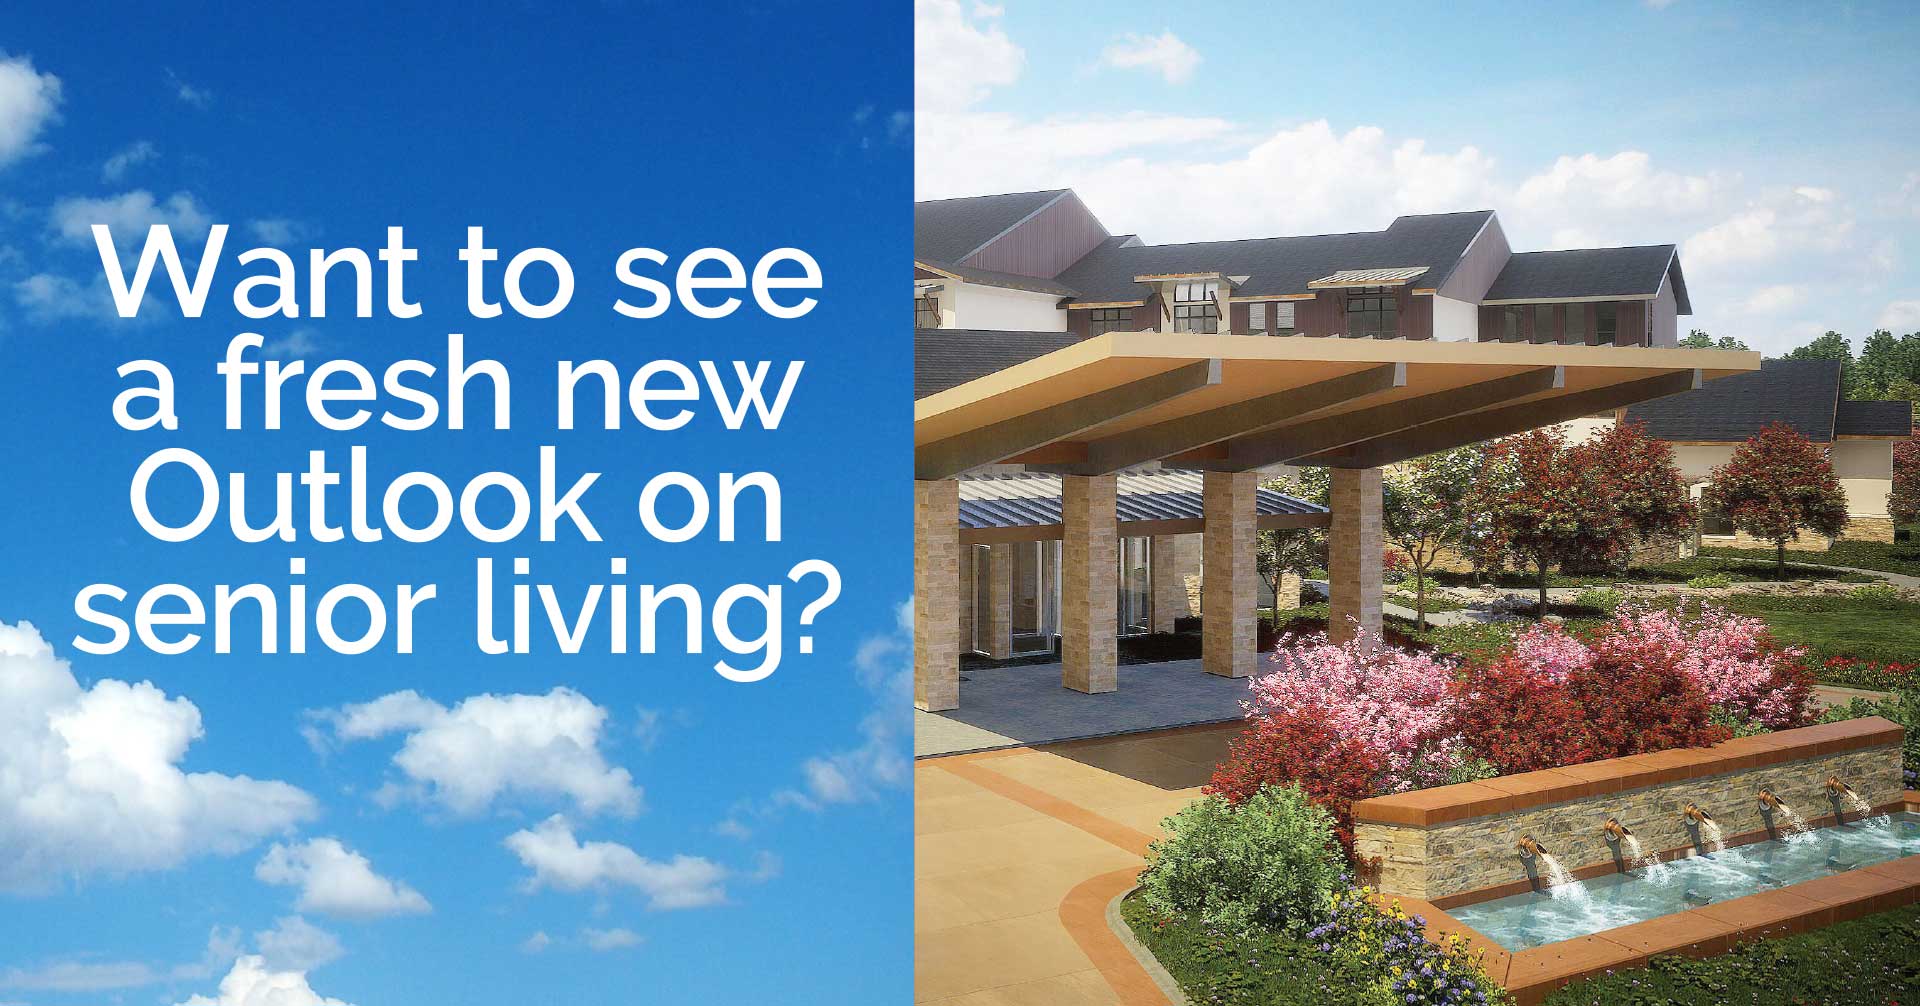 Want to see a fresh new Outlook on senior living?